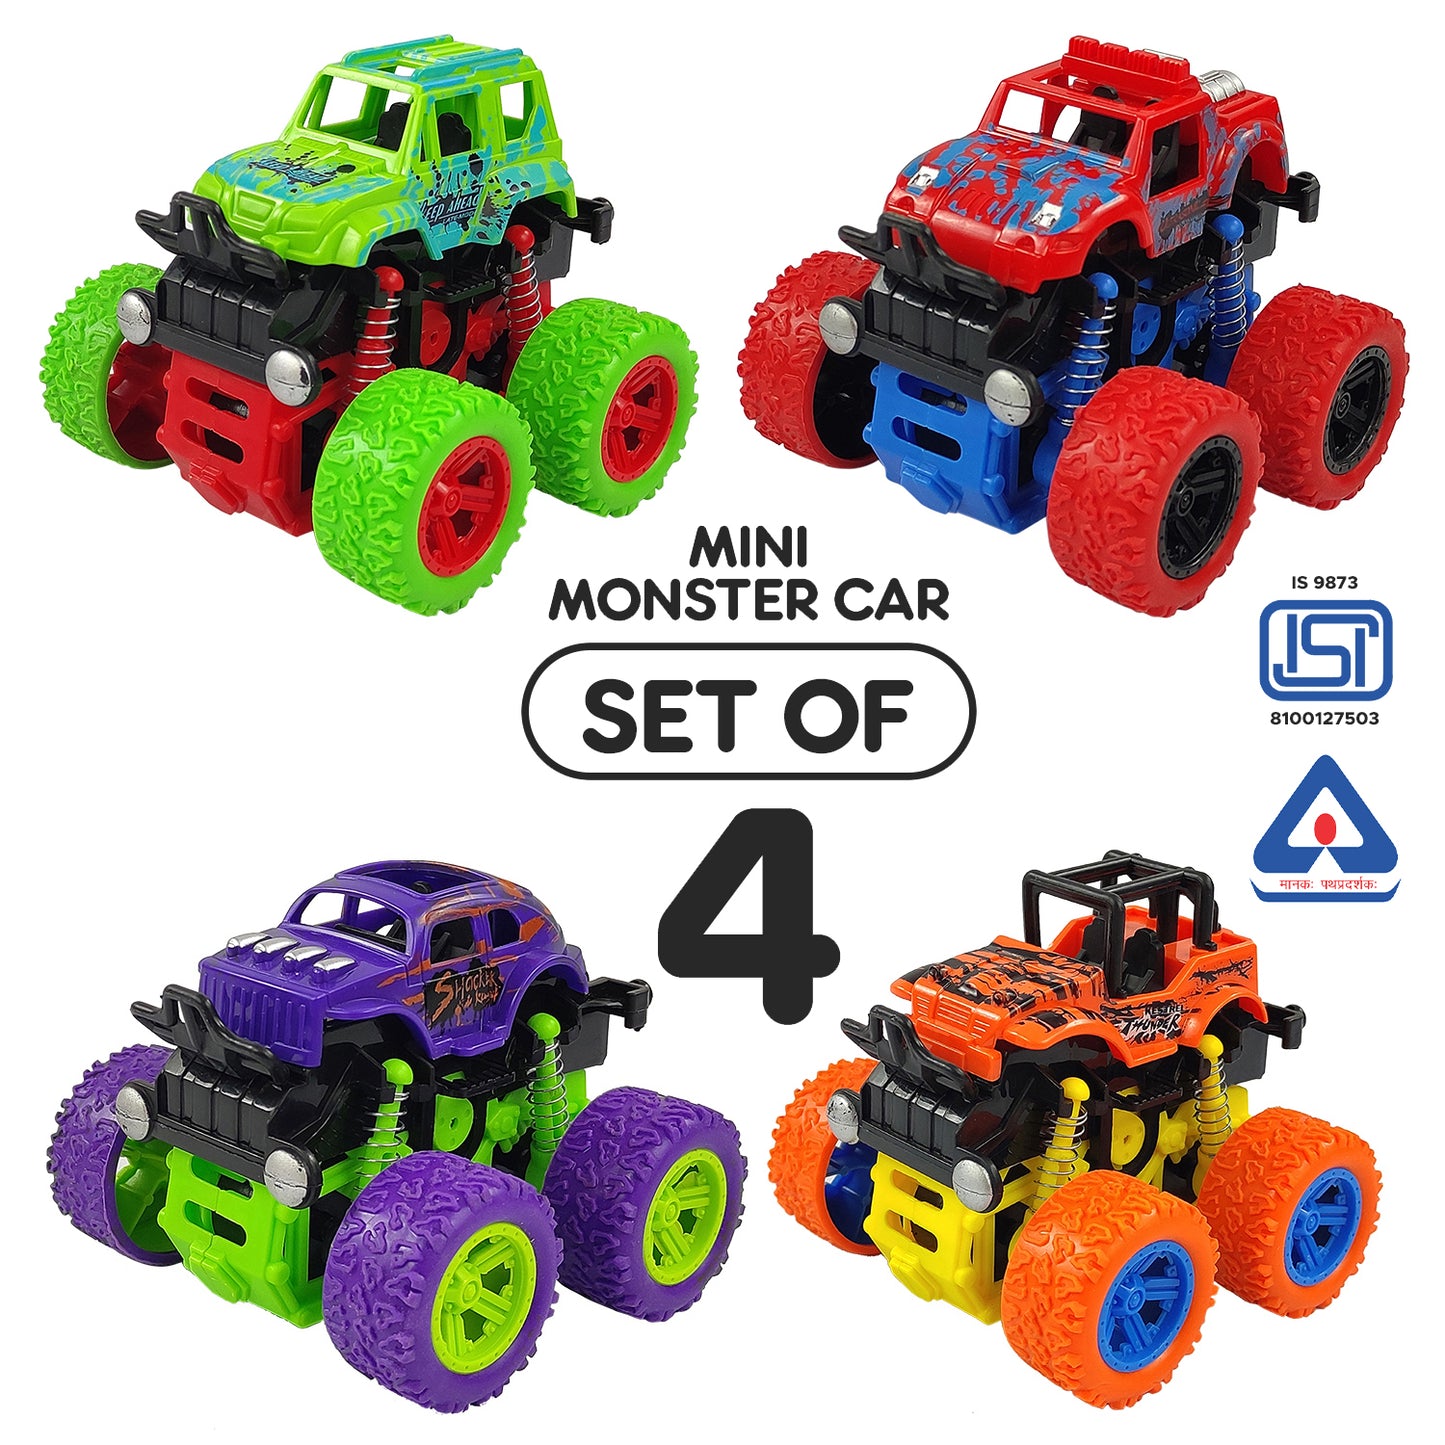 NHR Premium Quality Mini Monster Friction Powered Cars (You will get any color)